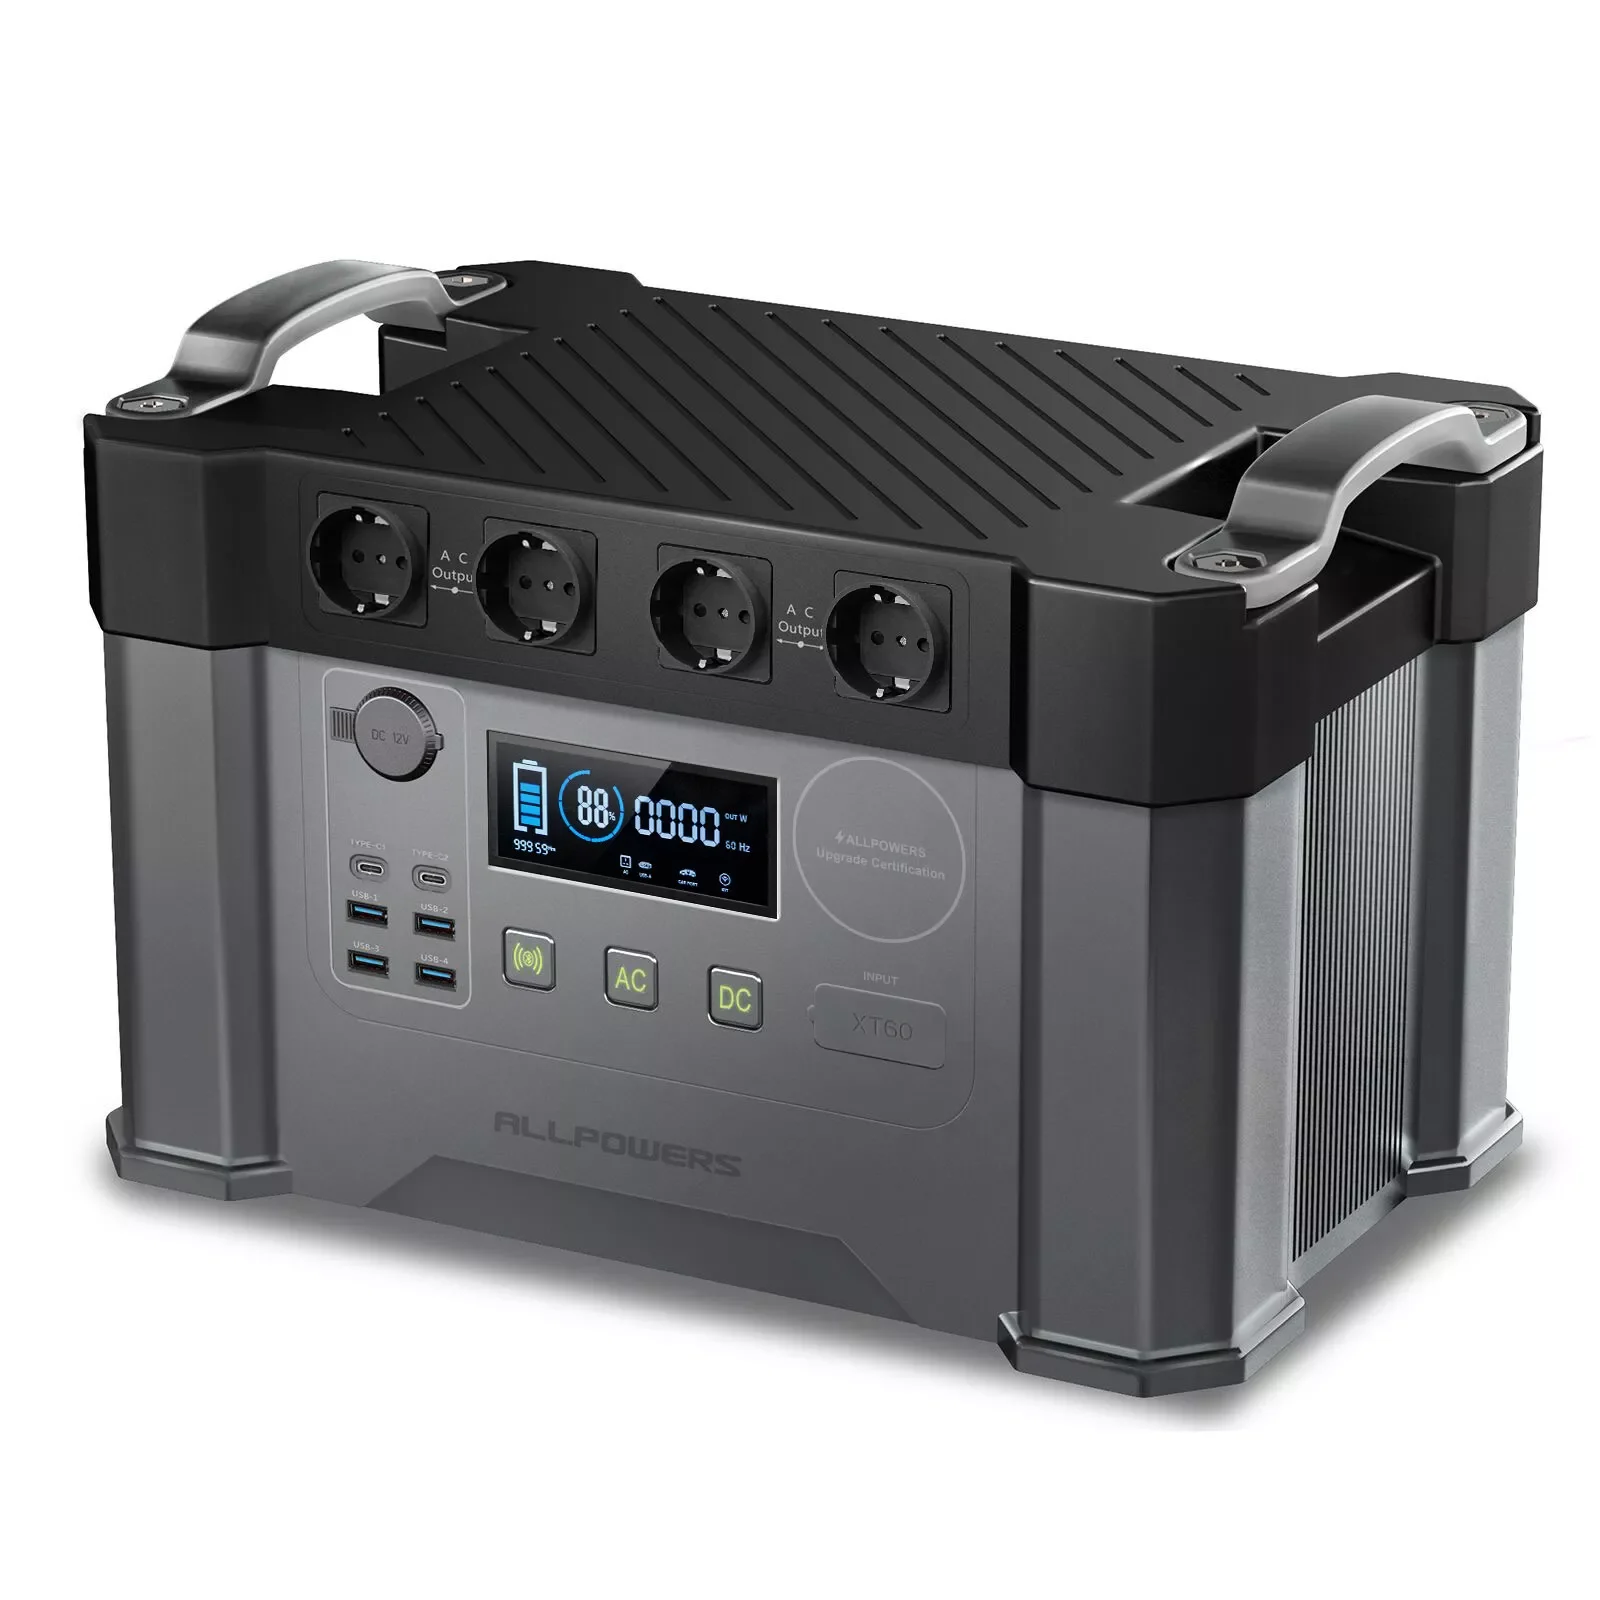 

Portable Power Station 110 / 230V Solar Generator 2000W/700W/300W/200W Emergency Power Supply Fit For Iphone Camping